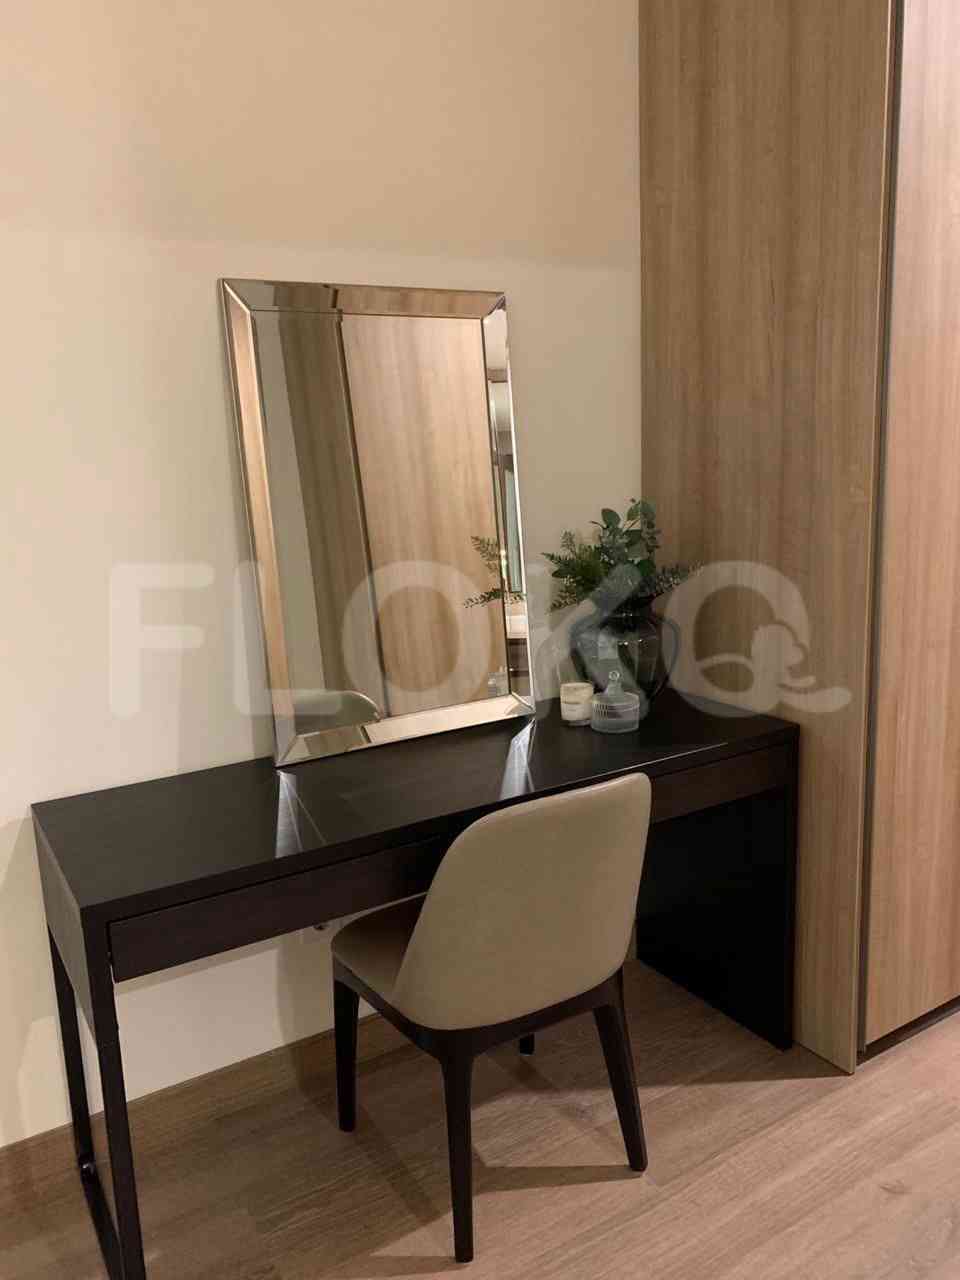 2 Bedroom on 18th Floor for Rent in Pakubuwono Spring Apartment - fga597 5